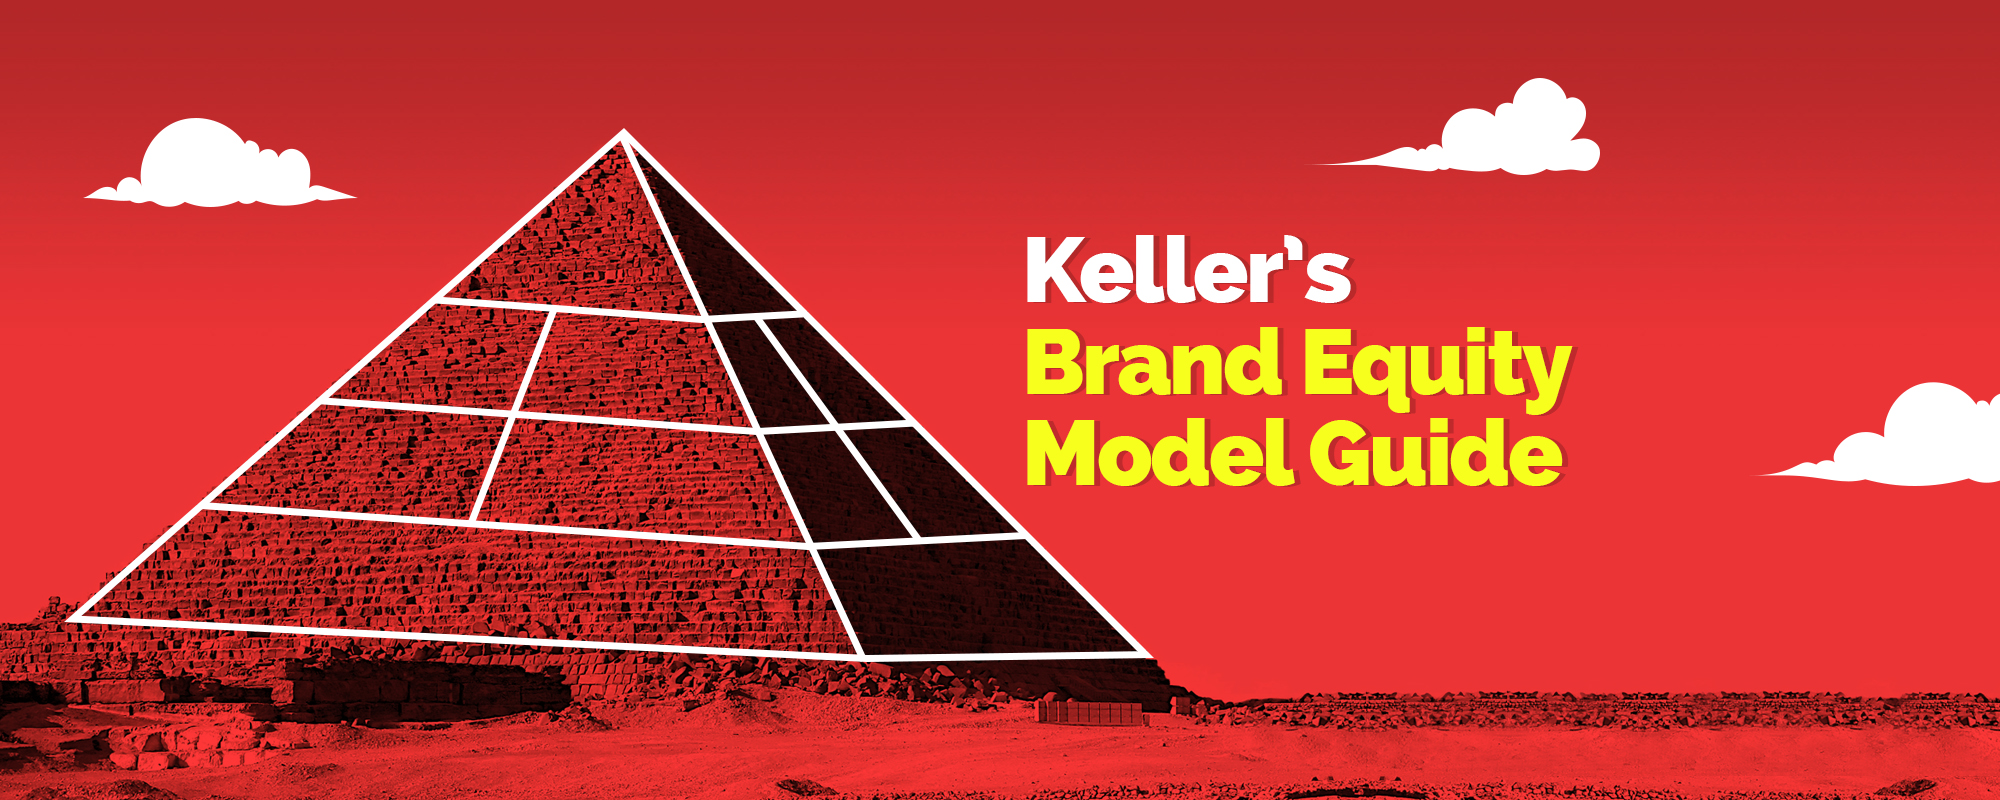 Keller’s Brand Equity Pyramid Perfected by Young Online Businesses